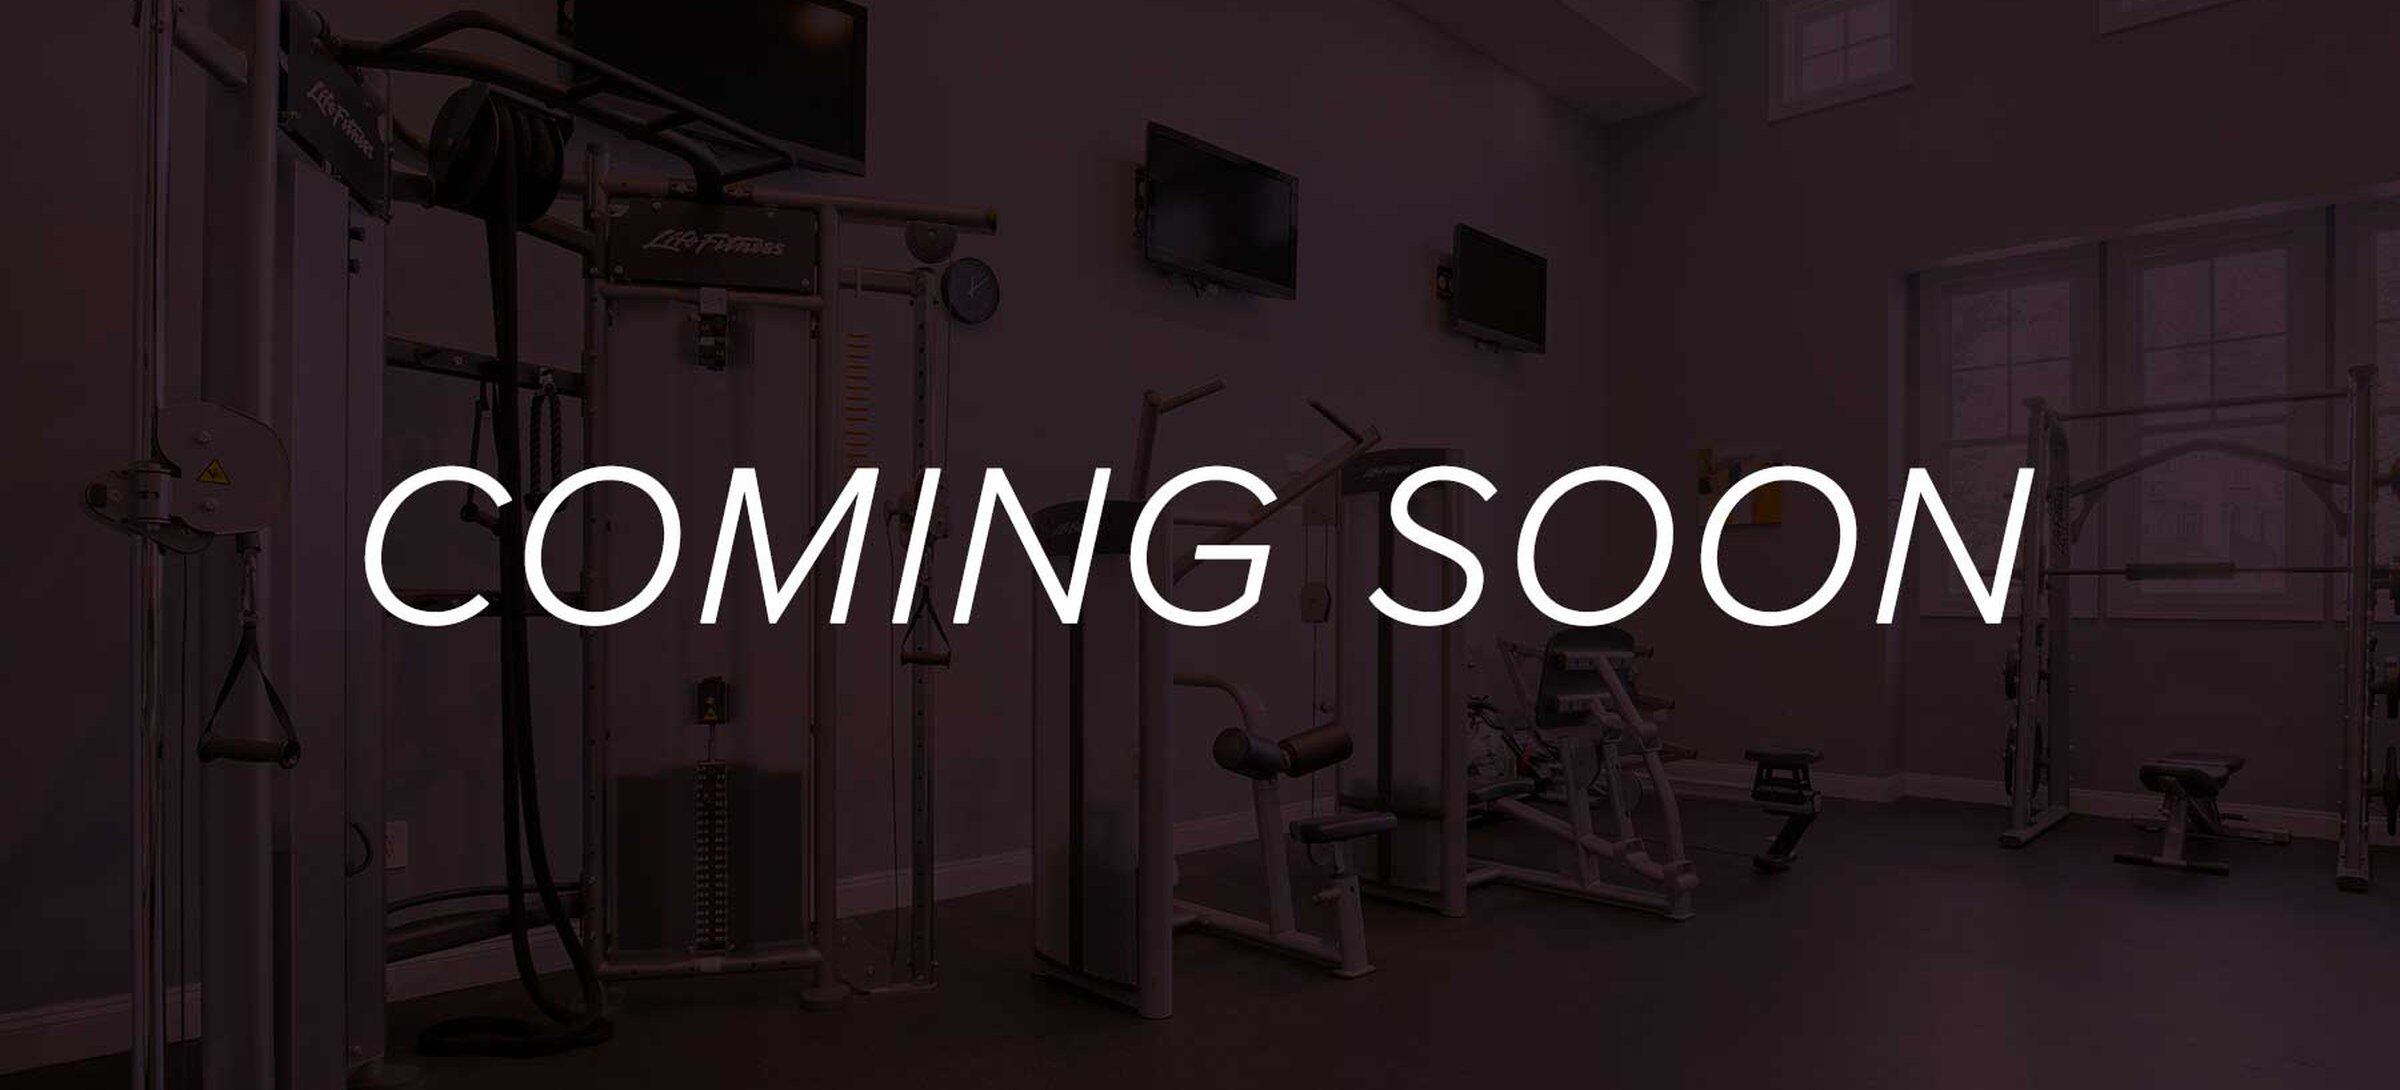 Coming soon - Renovated fitness center with an improved layout